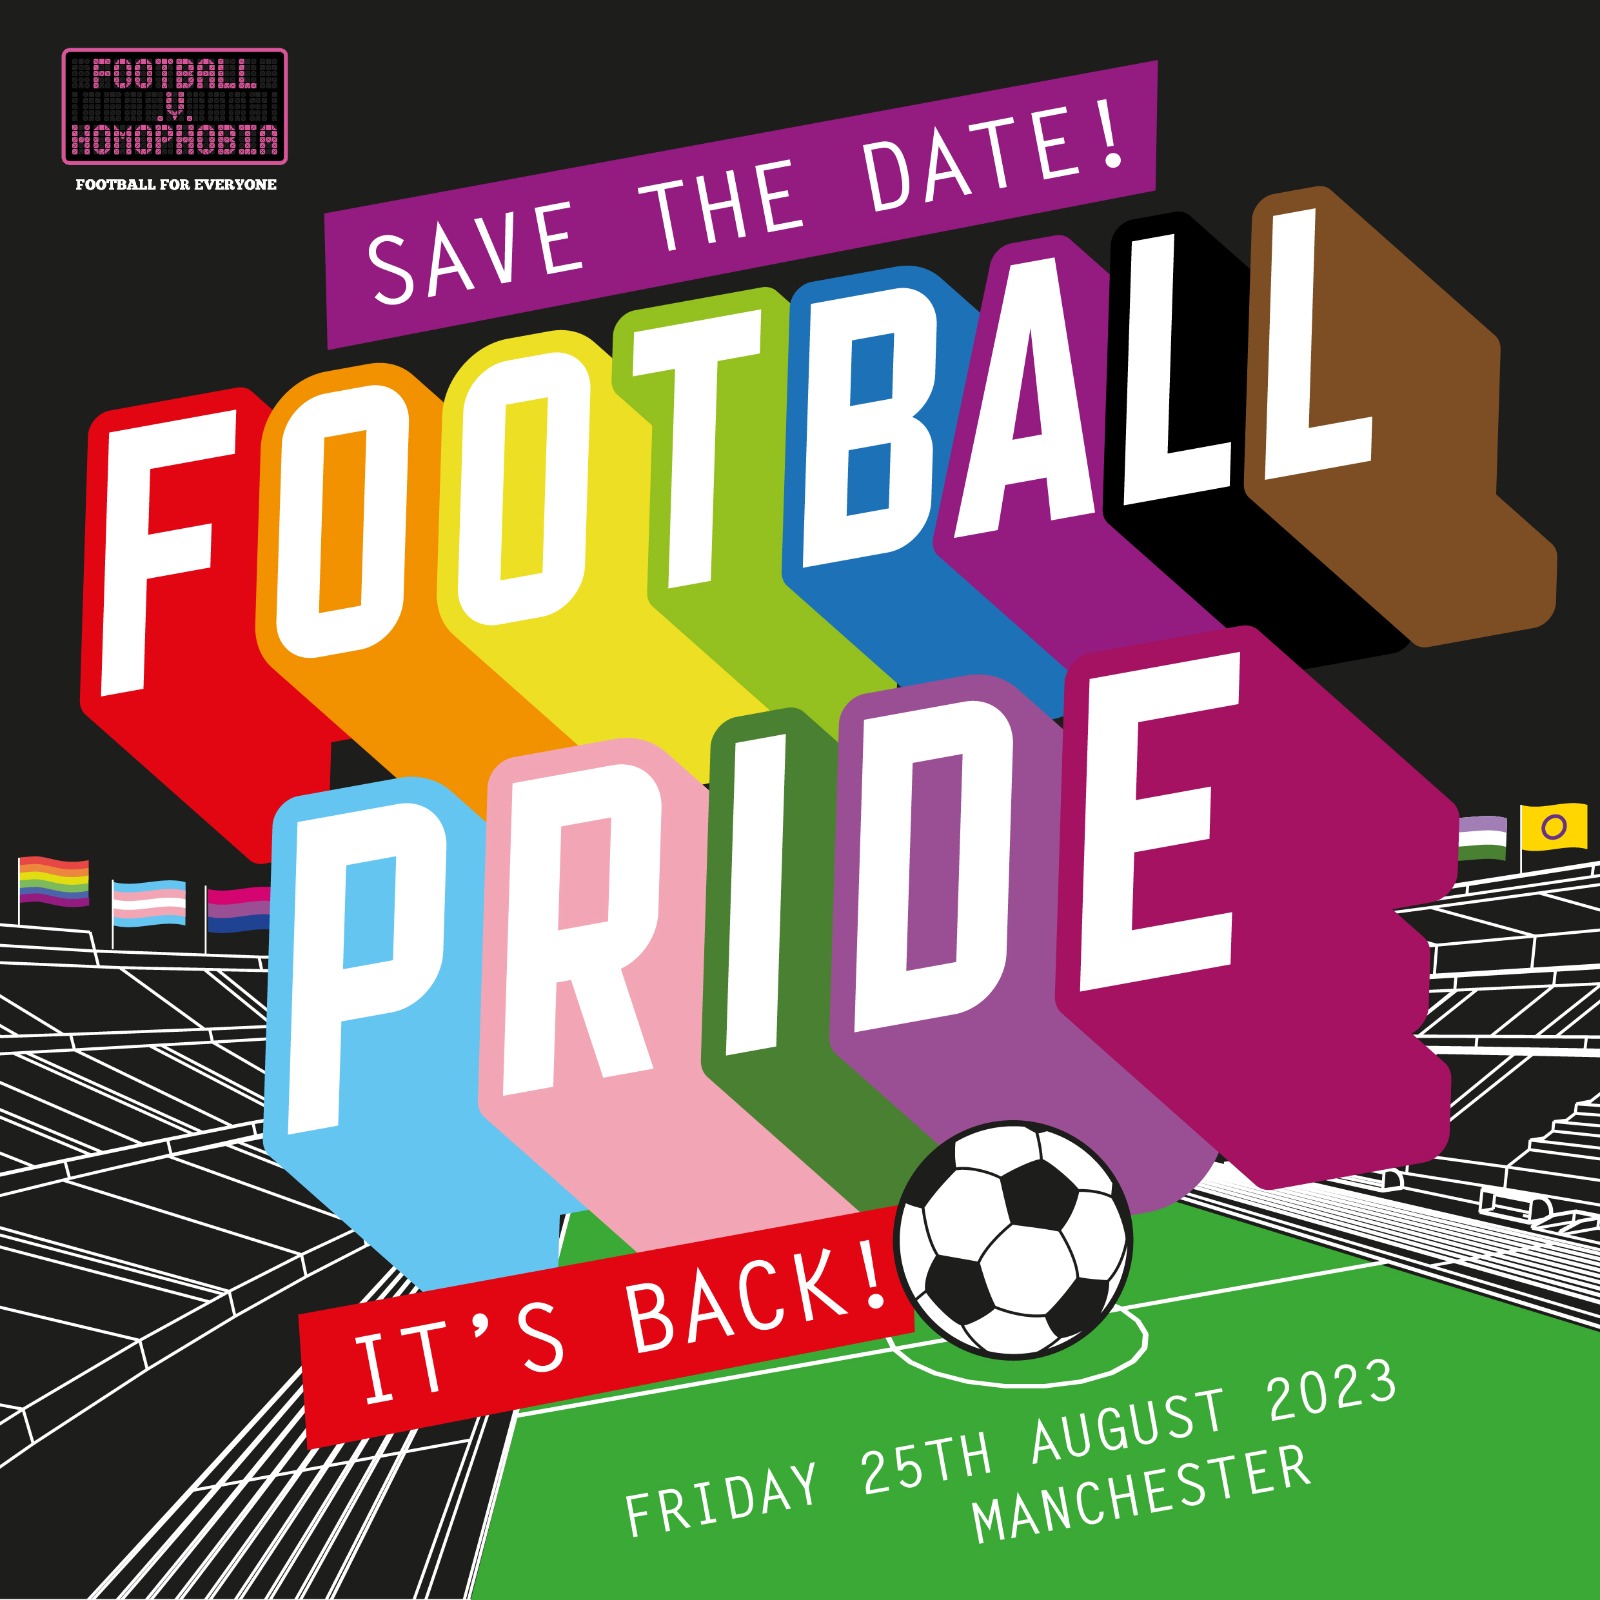 Football Pride to return at Manchester Pride, celebrating LGBTQ+ people and culture in the game